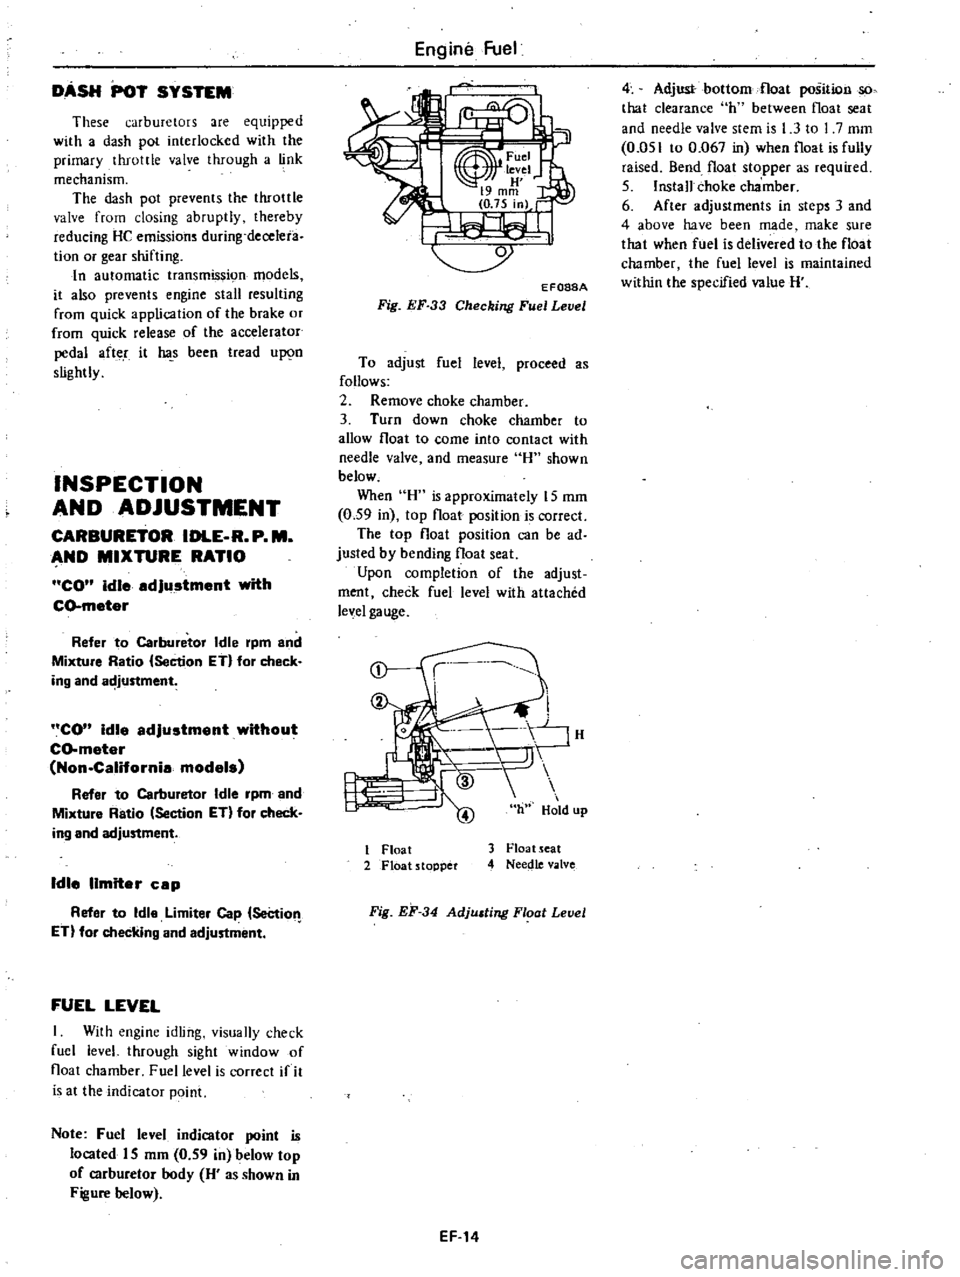 DATSUN 210 1979  Service Manual 
DASH 
POT 
SYSTEM

These

carburetors 
are

equipped

with 
a 
dash

pot 
interlocked 
with 
the

primary 
thrott 
Ie 
valve

through 
a

link

mechanism

The 
dash

pot 
prevents 
the

throttle

val